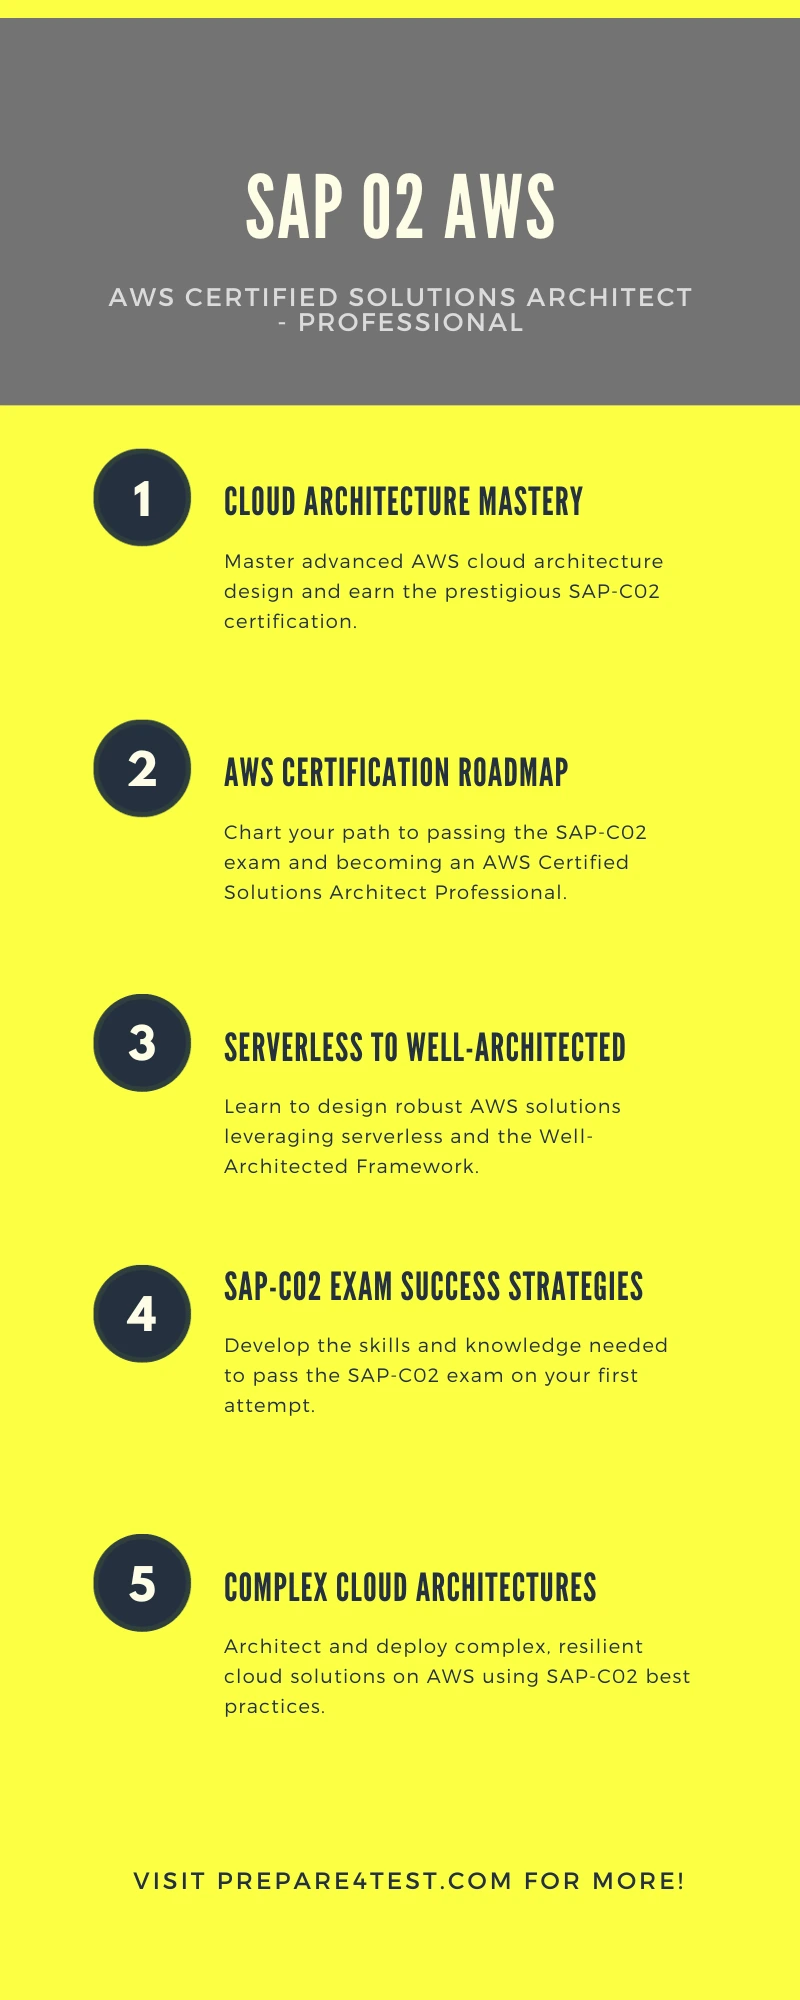 Infograph showing elated information for sap 02 aws exam.